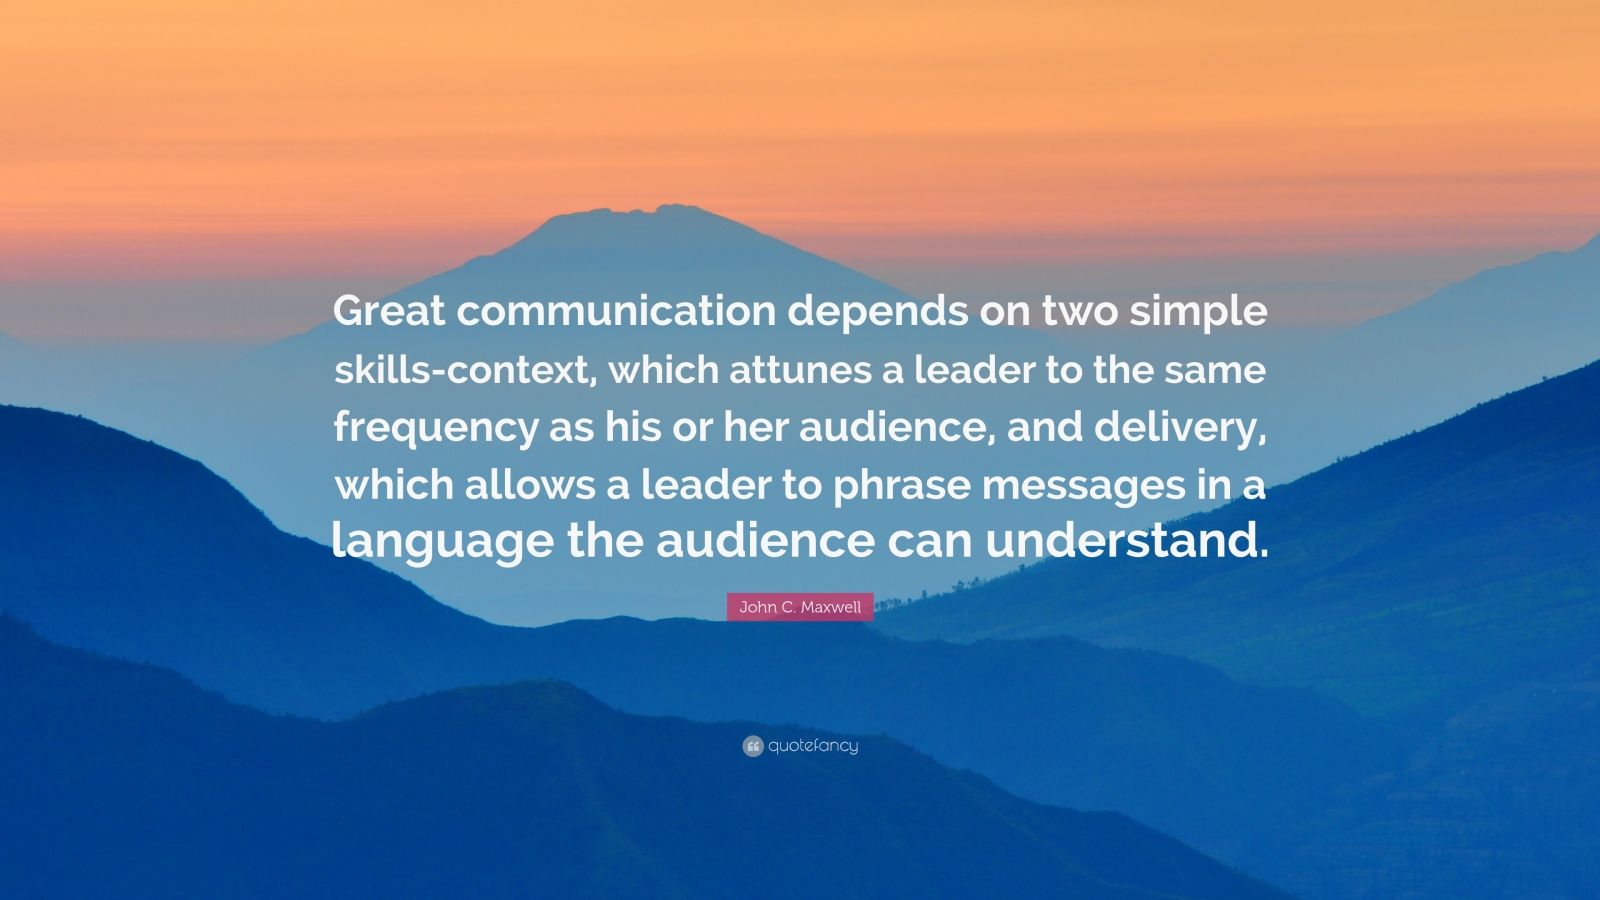 John C. Maxwell Quote: “Great communication depends on two simple